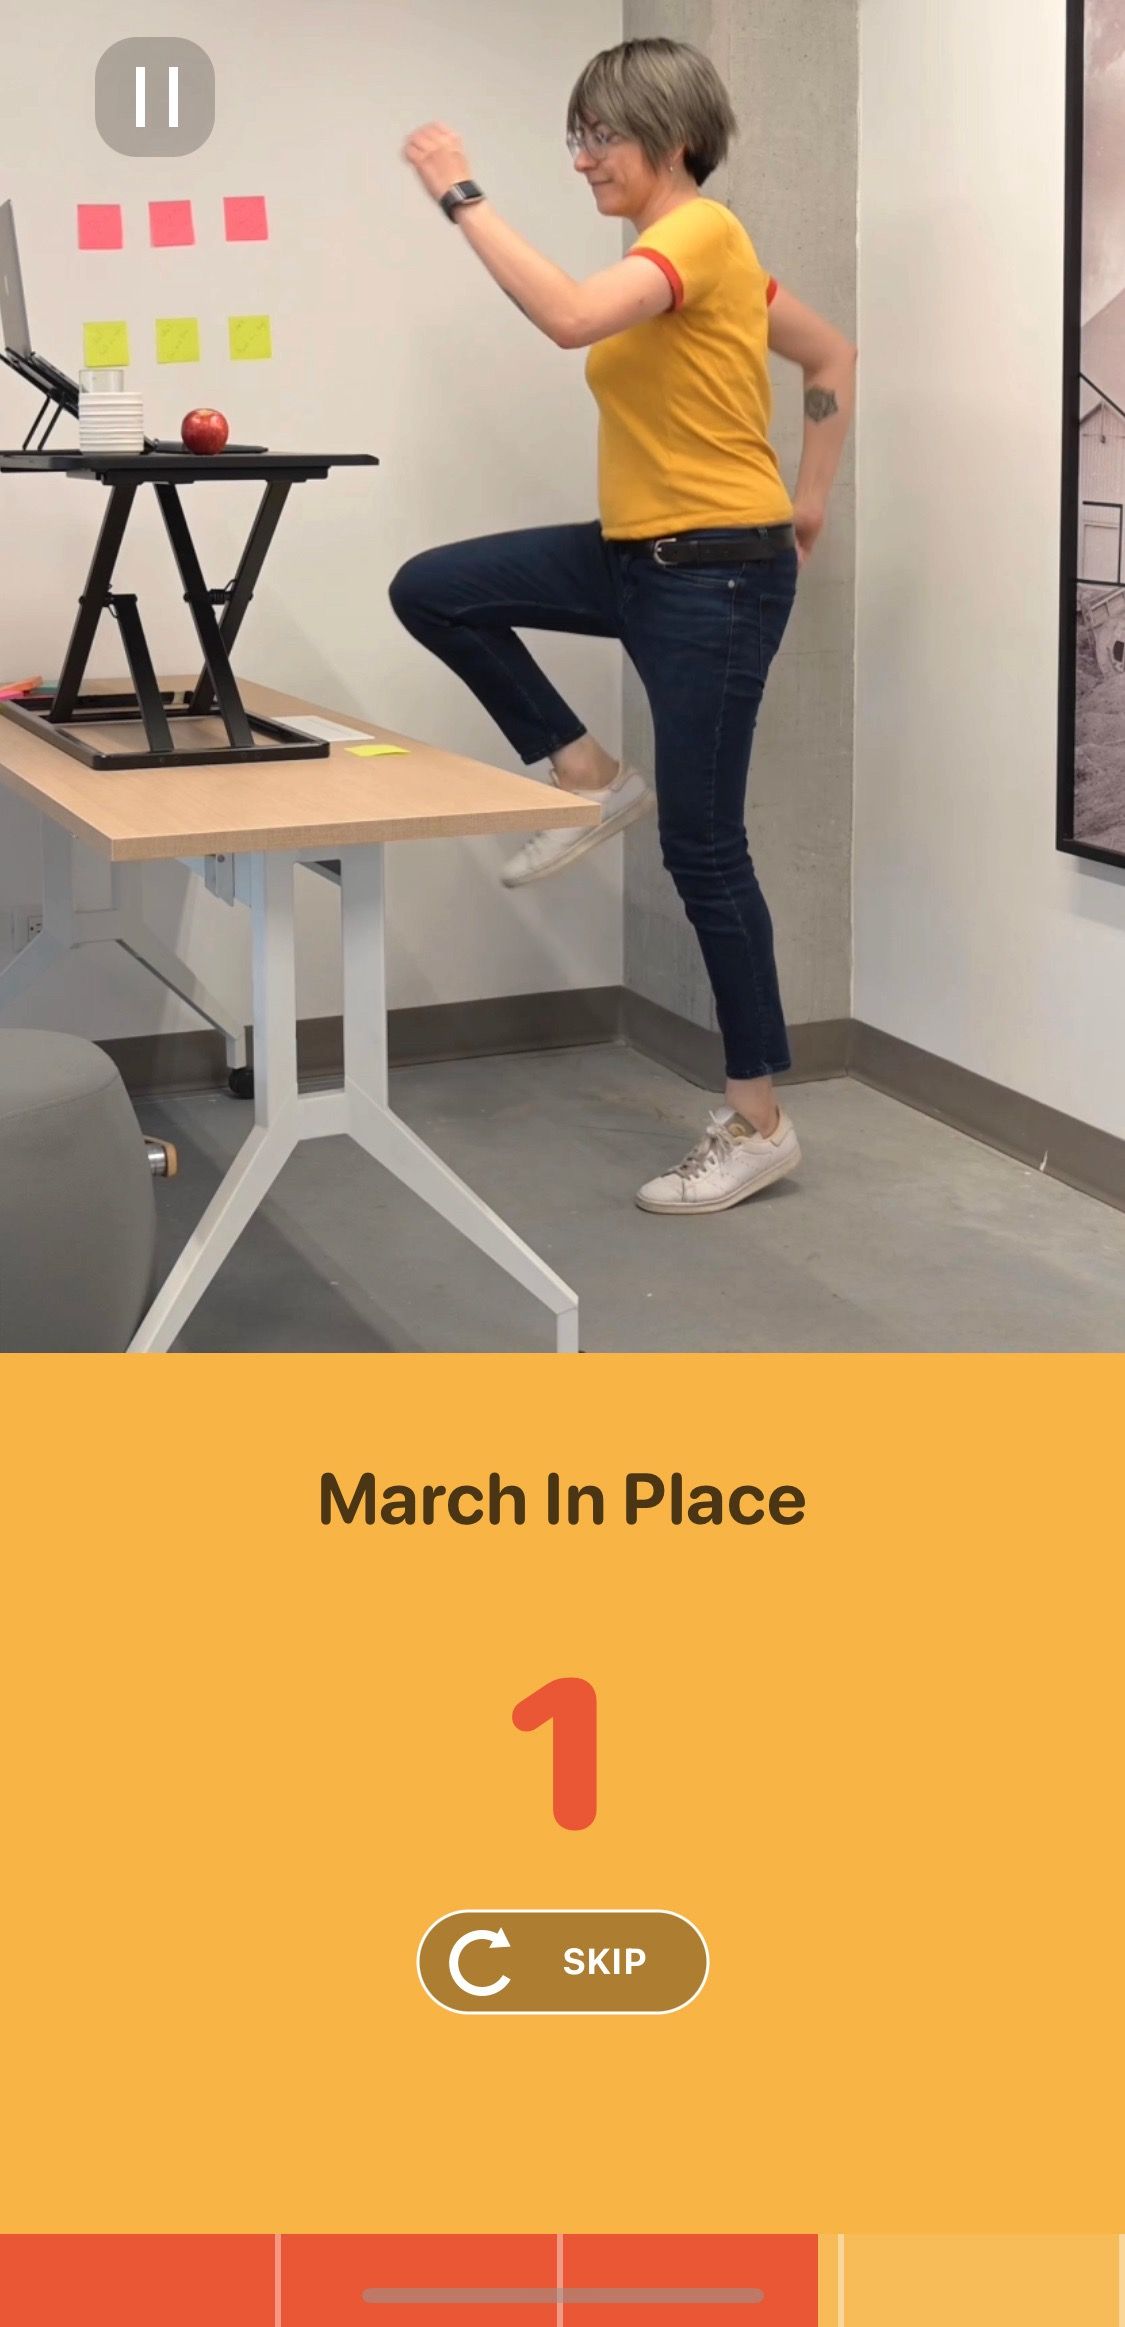 Screenshot of Wakeout app showing the march in place exercise screen 3